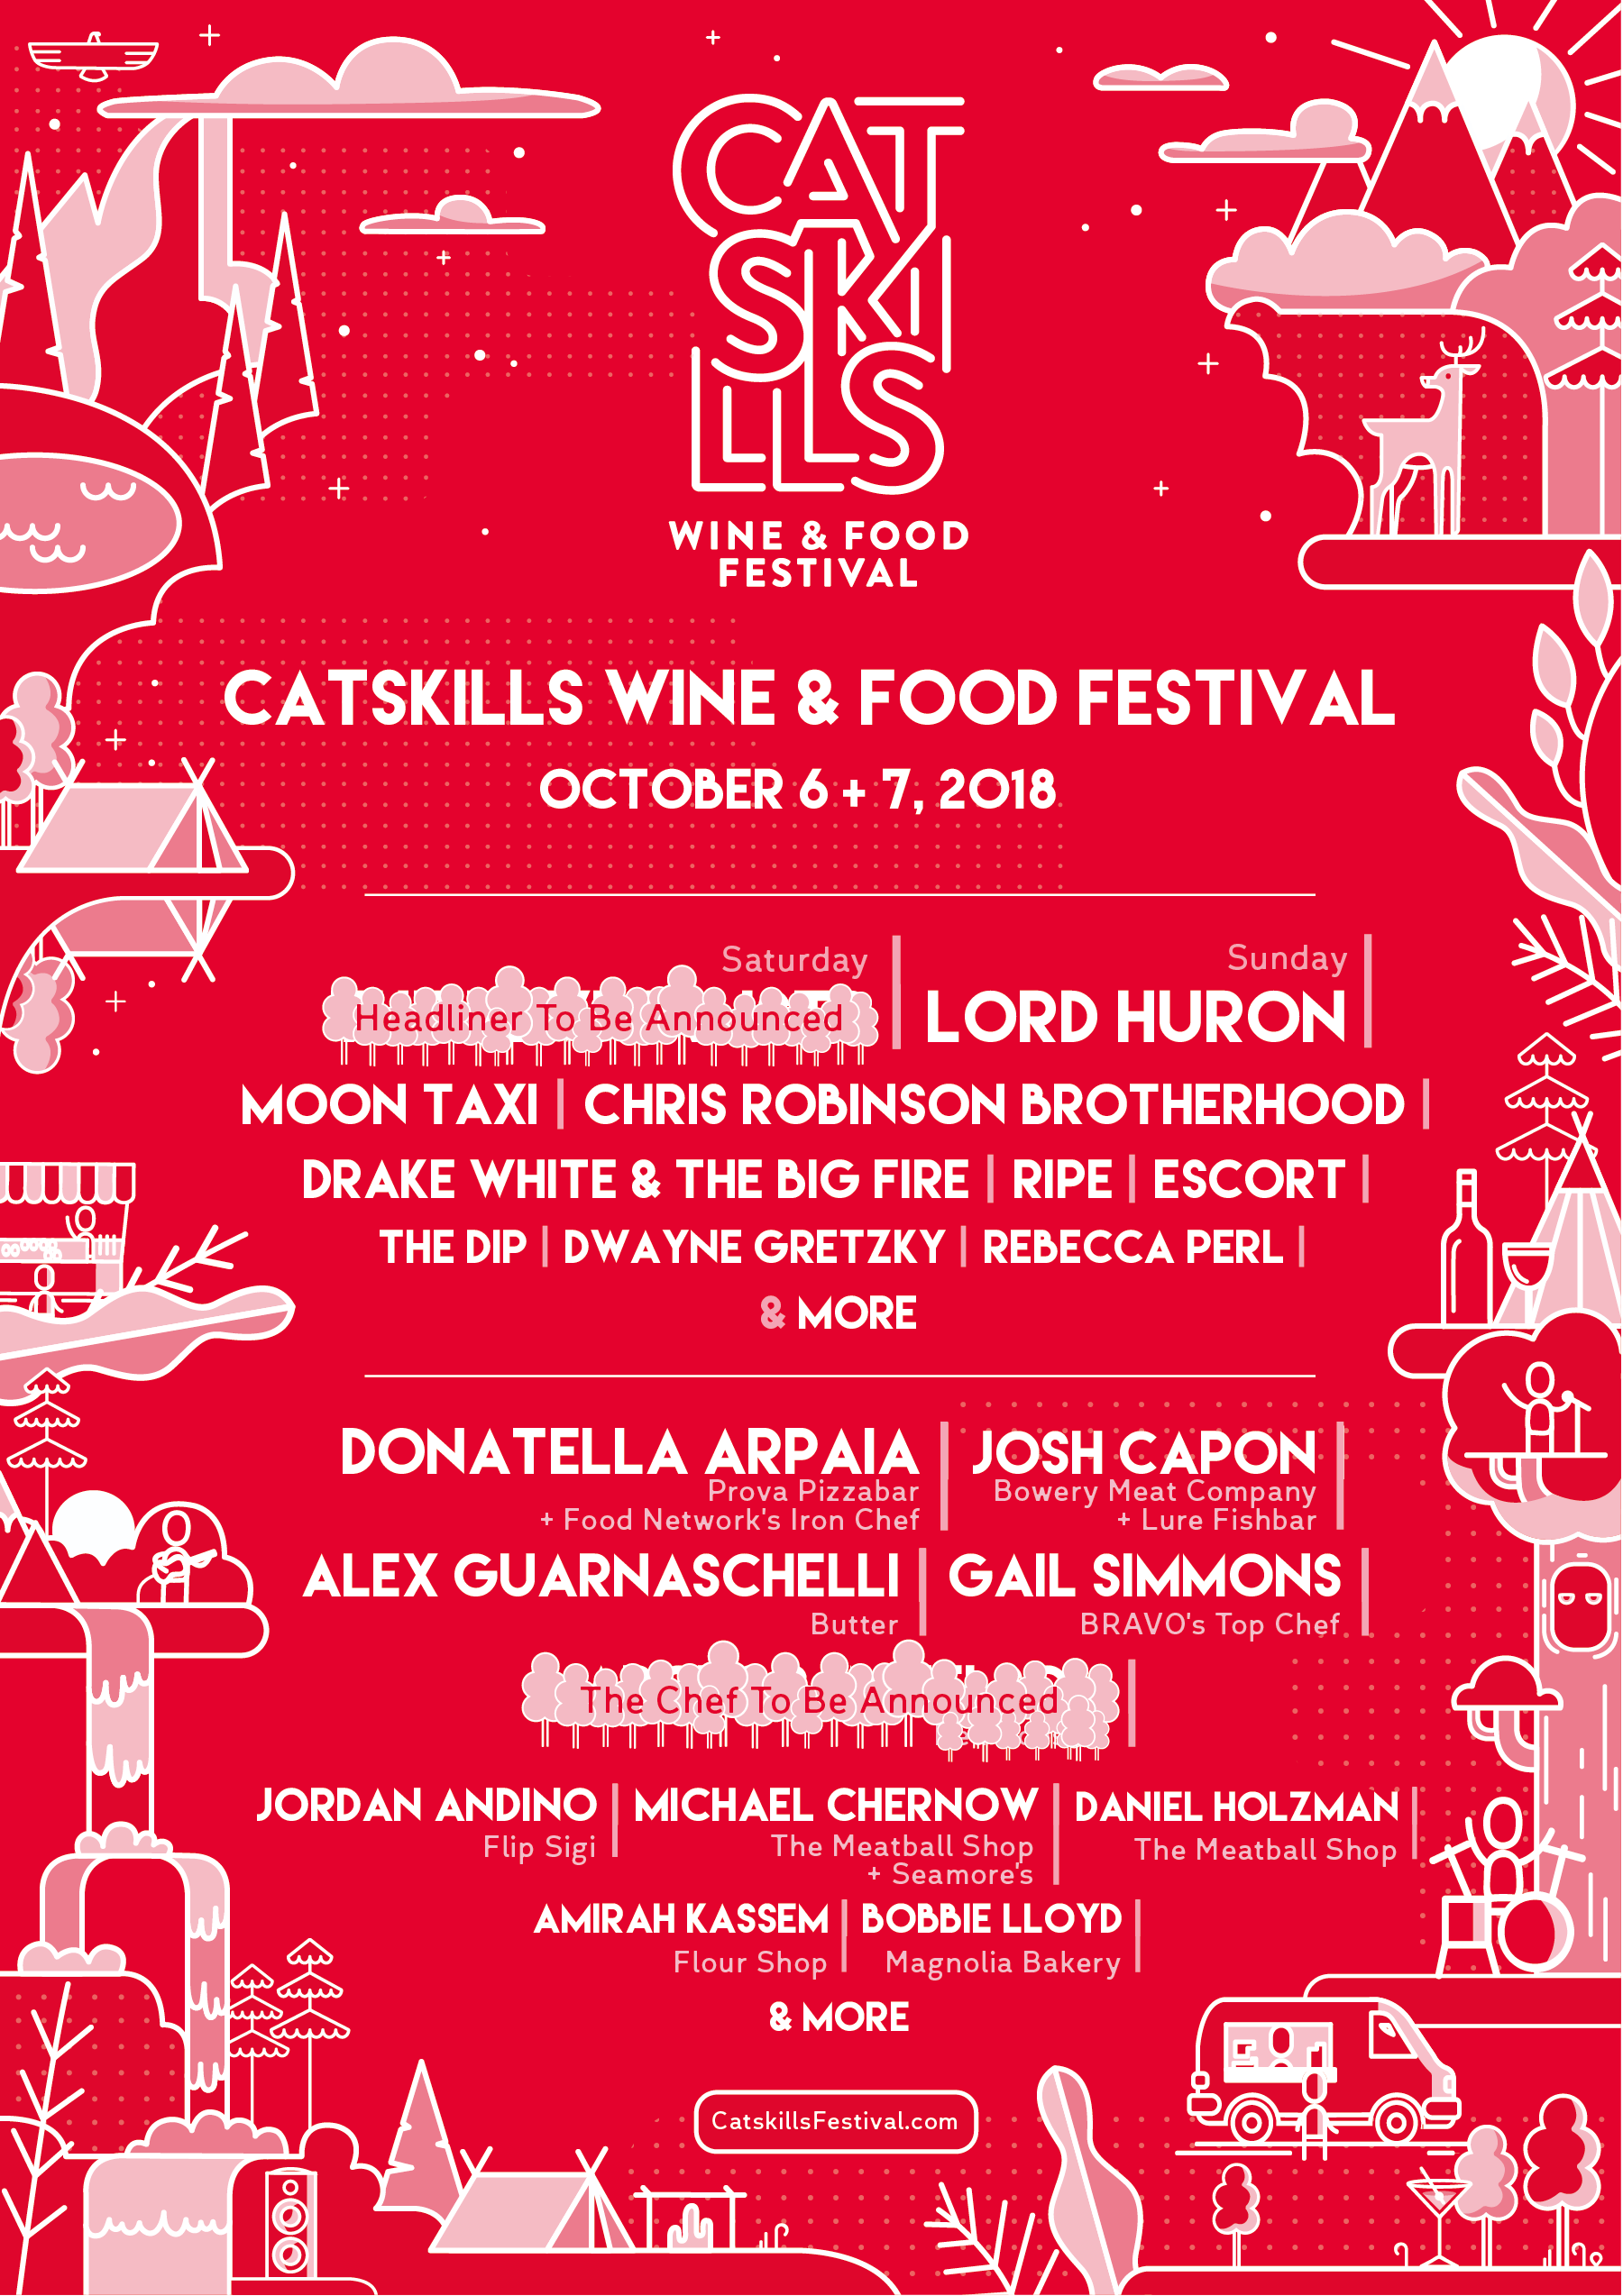 Catskills Wine and Food Festival Announces Their Initial Lineup!